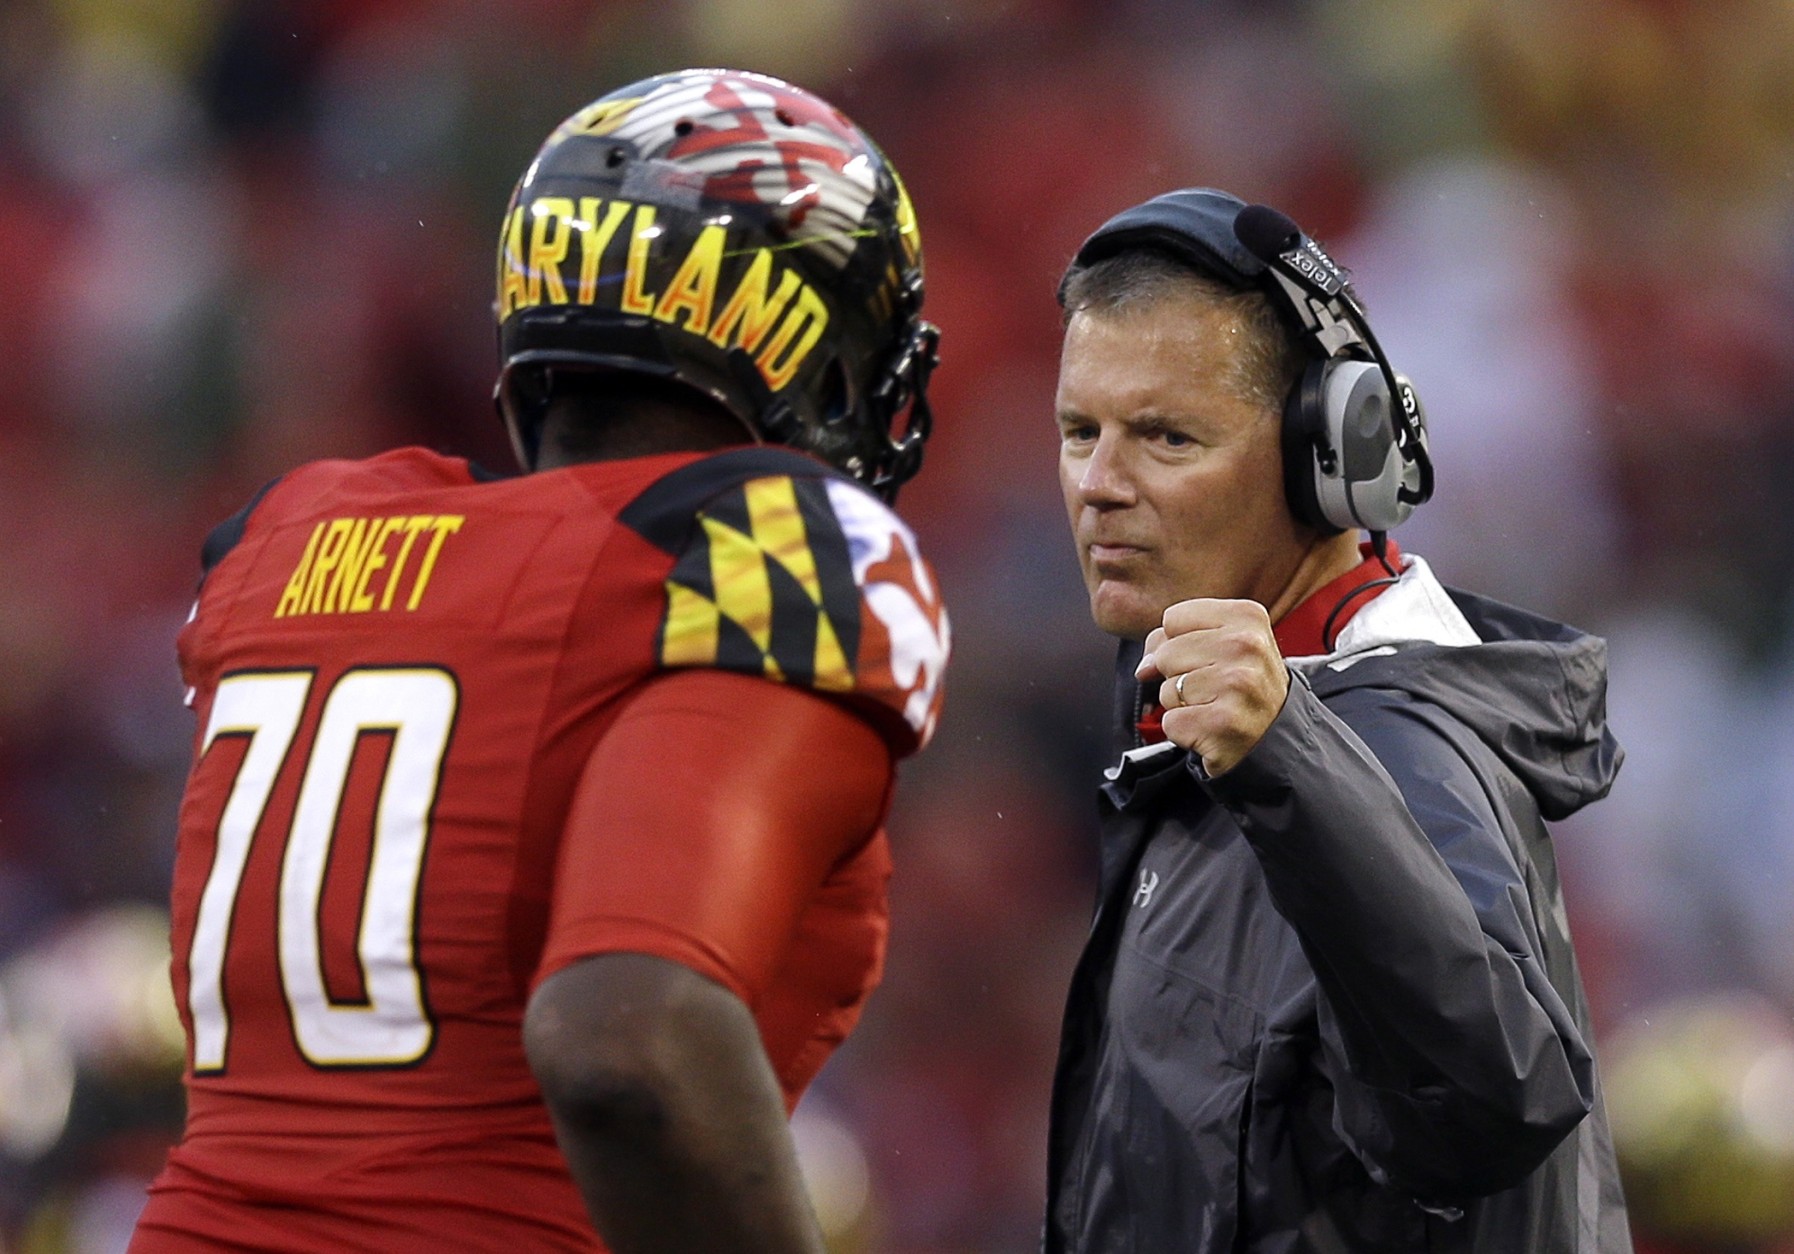 FILE - In this Sept. 21, 2013 file photo, Maryland head coach Randy Edsall fist bumps offensive linesman De'Onte Arnett as he jogs off the field during an NCAA college football game against West Virginia in Baltimore. Maryland won't have to cross the state line for its first bowl appearance since 2010. The Terrapins will face Marshall in the Military Bowl on Dec. 27. The game will be held at the home stadium of the Naval Academy, which is around 28 miles from the Maryland campus. (AP Photo/Patrick Semansky, File)